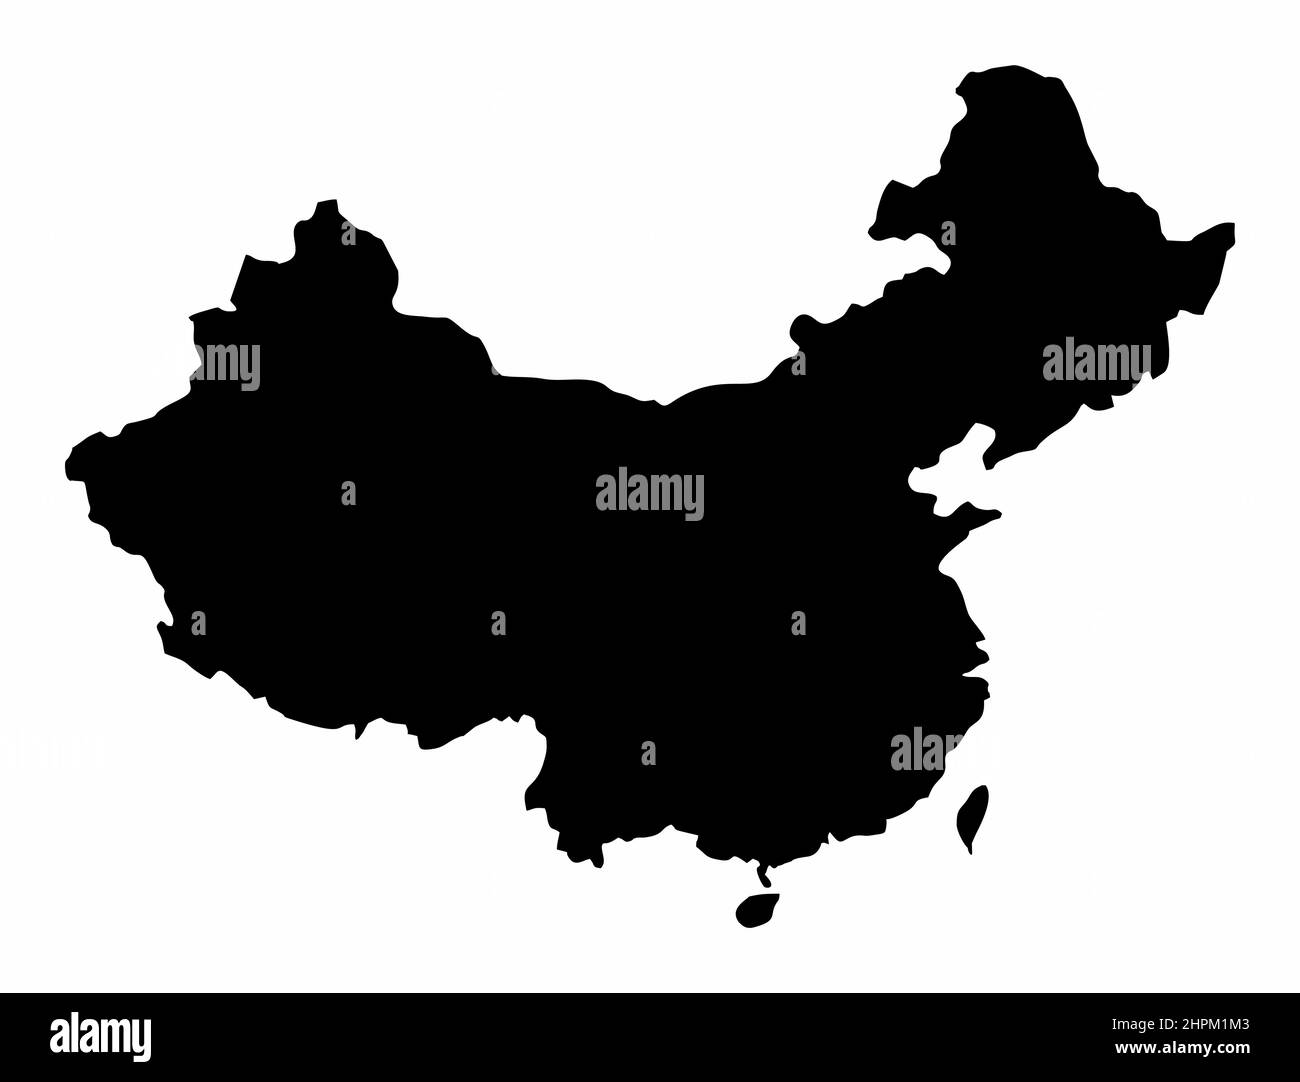 China silhouette map isolated on white background Stock Vector